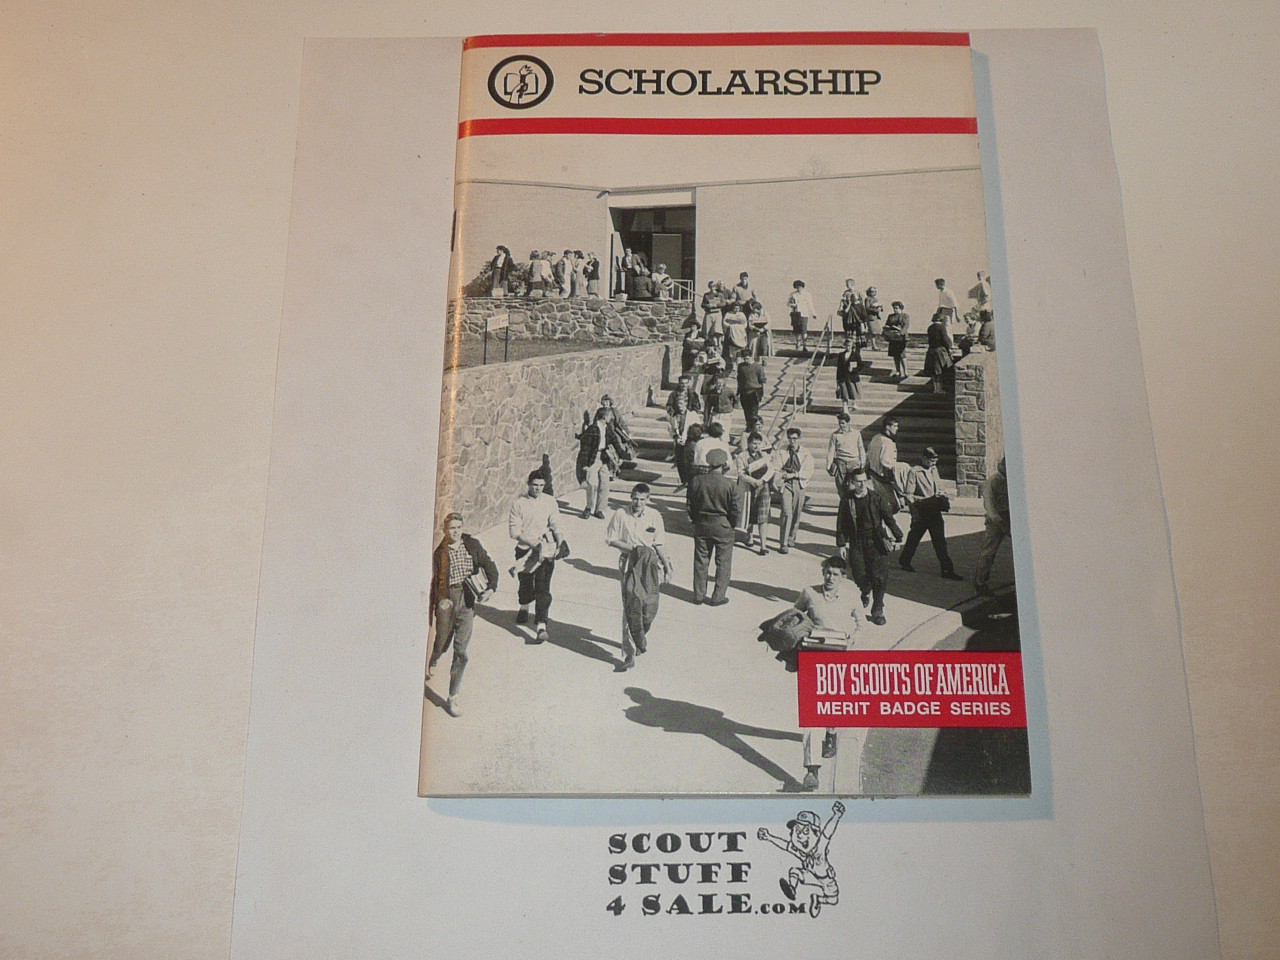 Scholarship Merit Badge Pamphlet, Type 9, Red Band Cover, 3-86 Printing